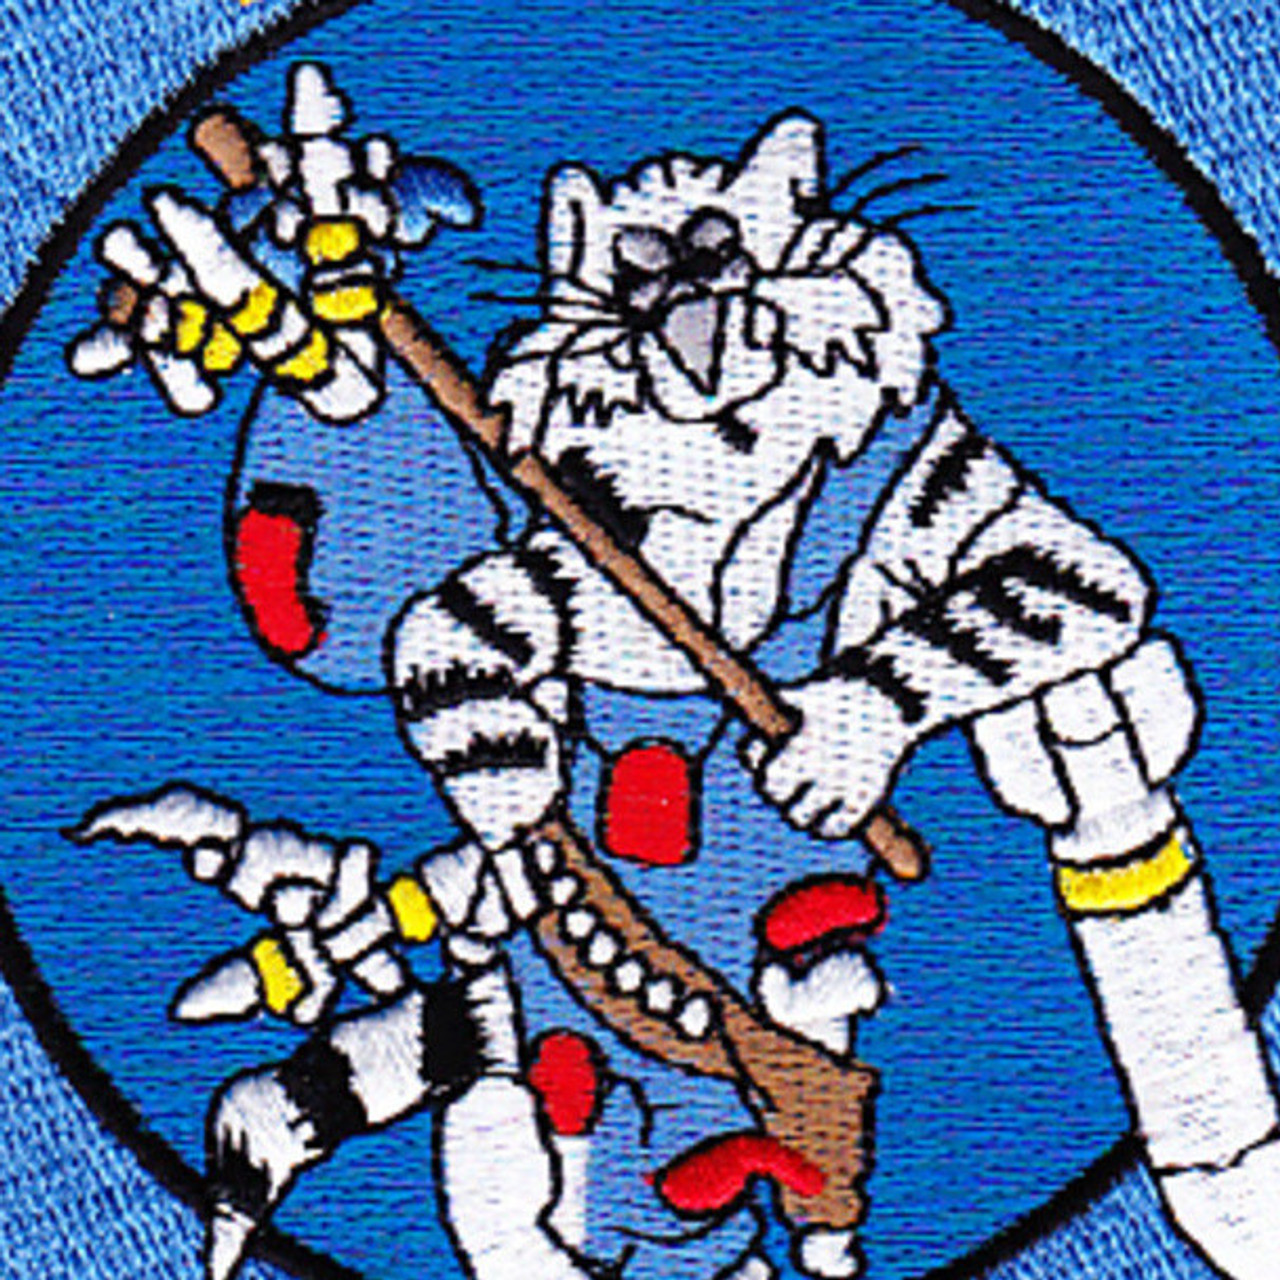 VF-1486 Patch The Fighting Hobos